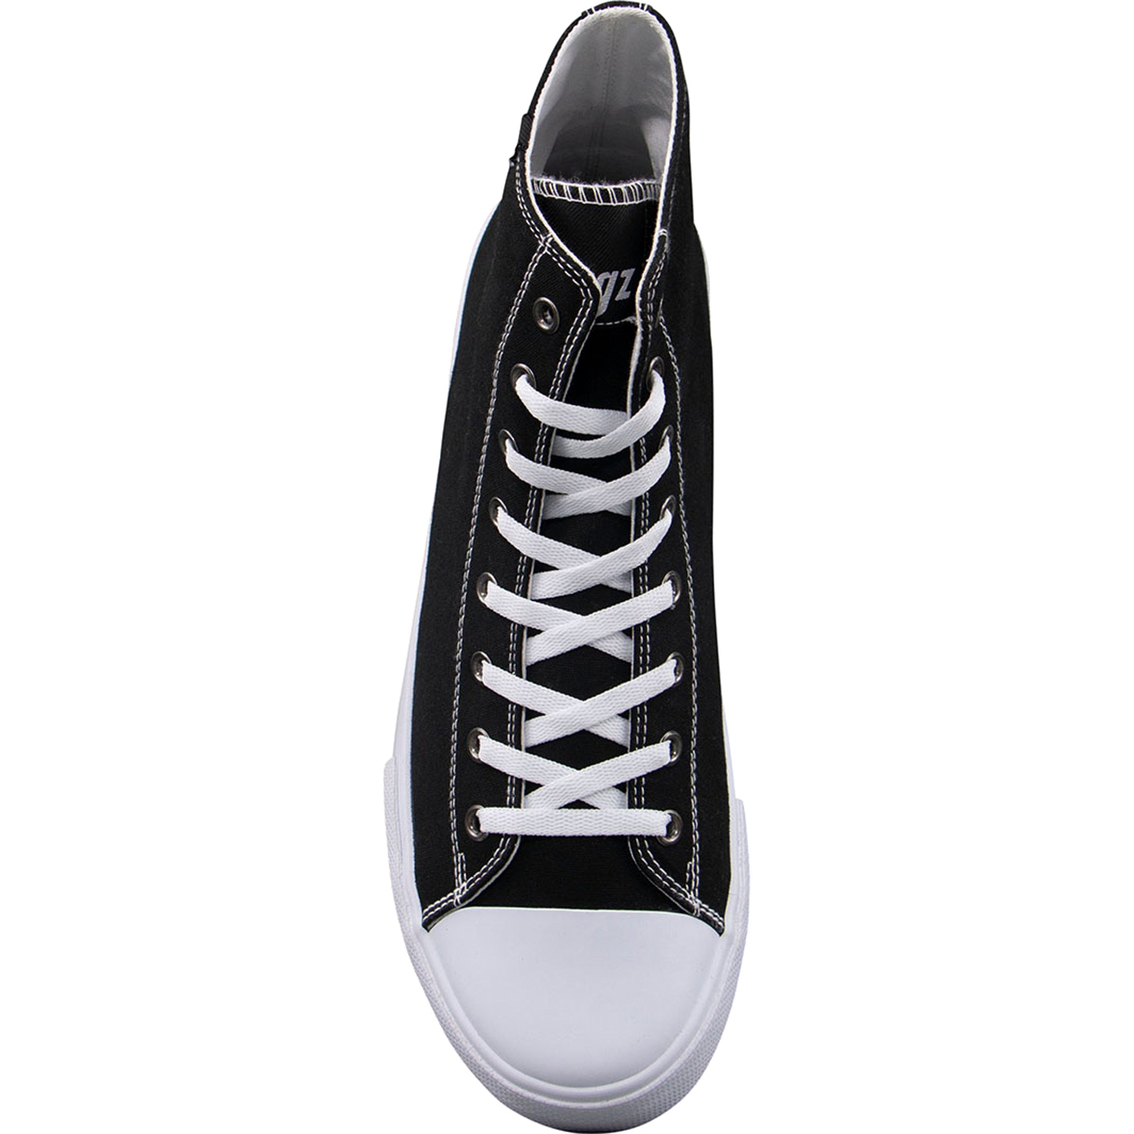 Lugz Men's Stagger Hi Sneakers - Image 4 of 7